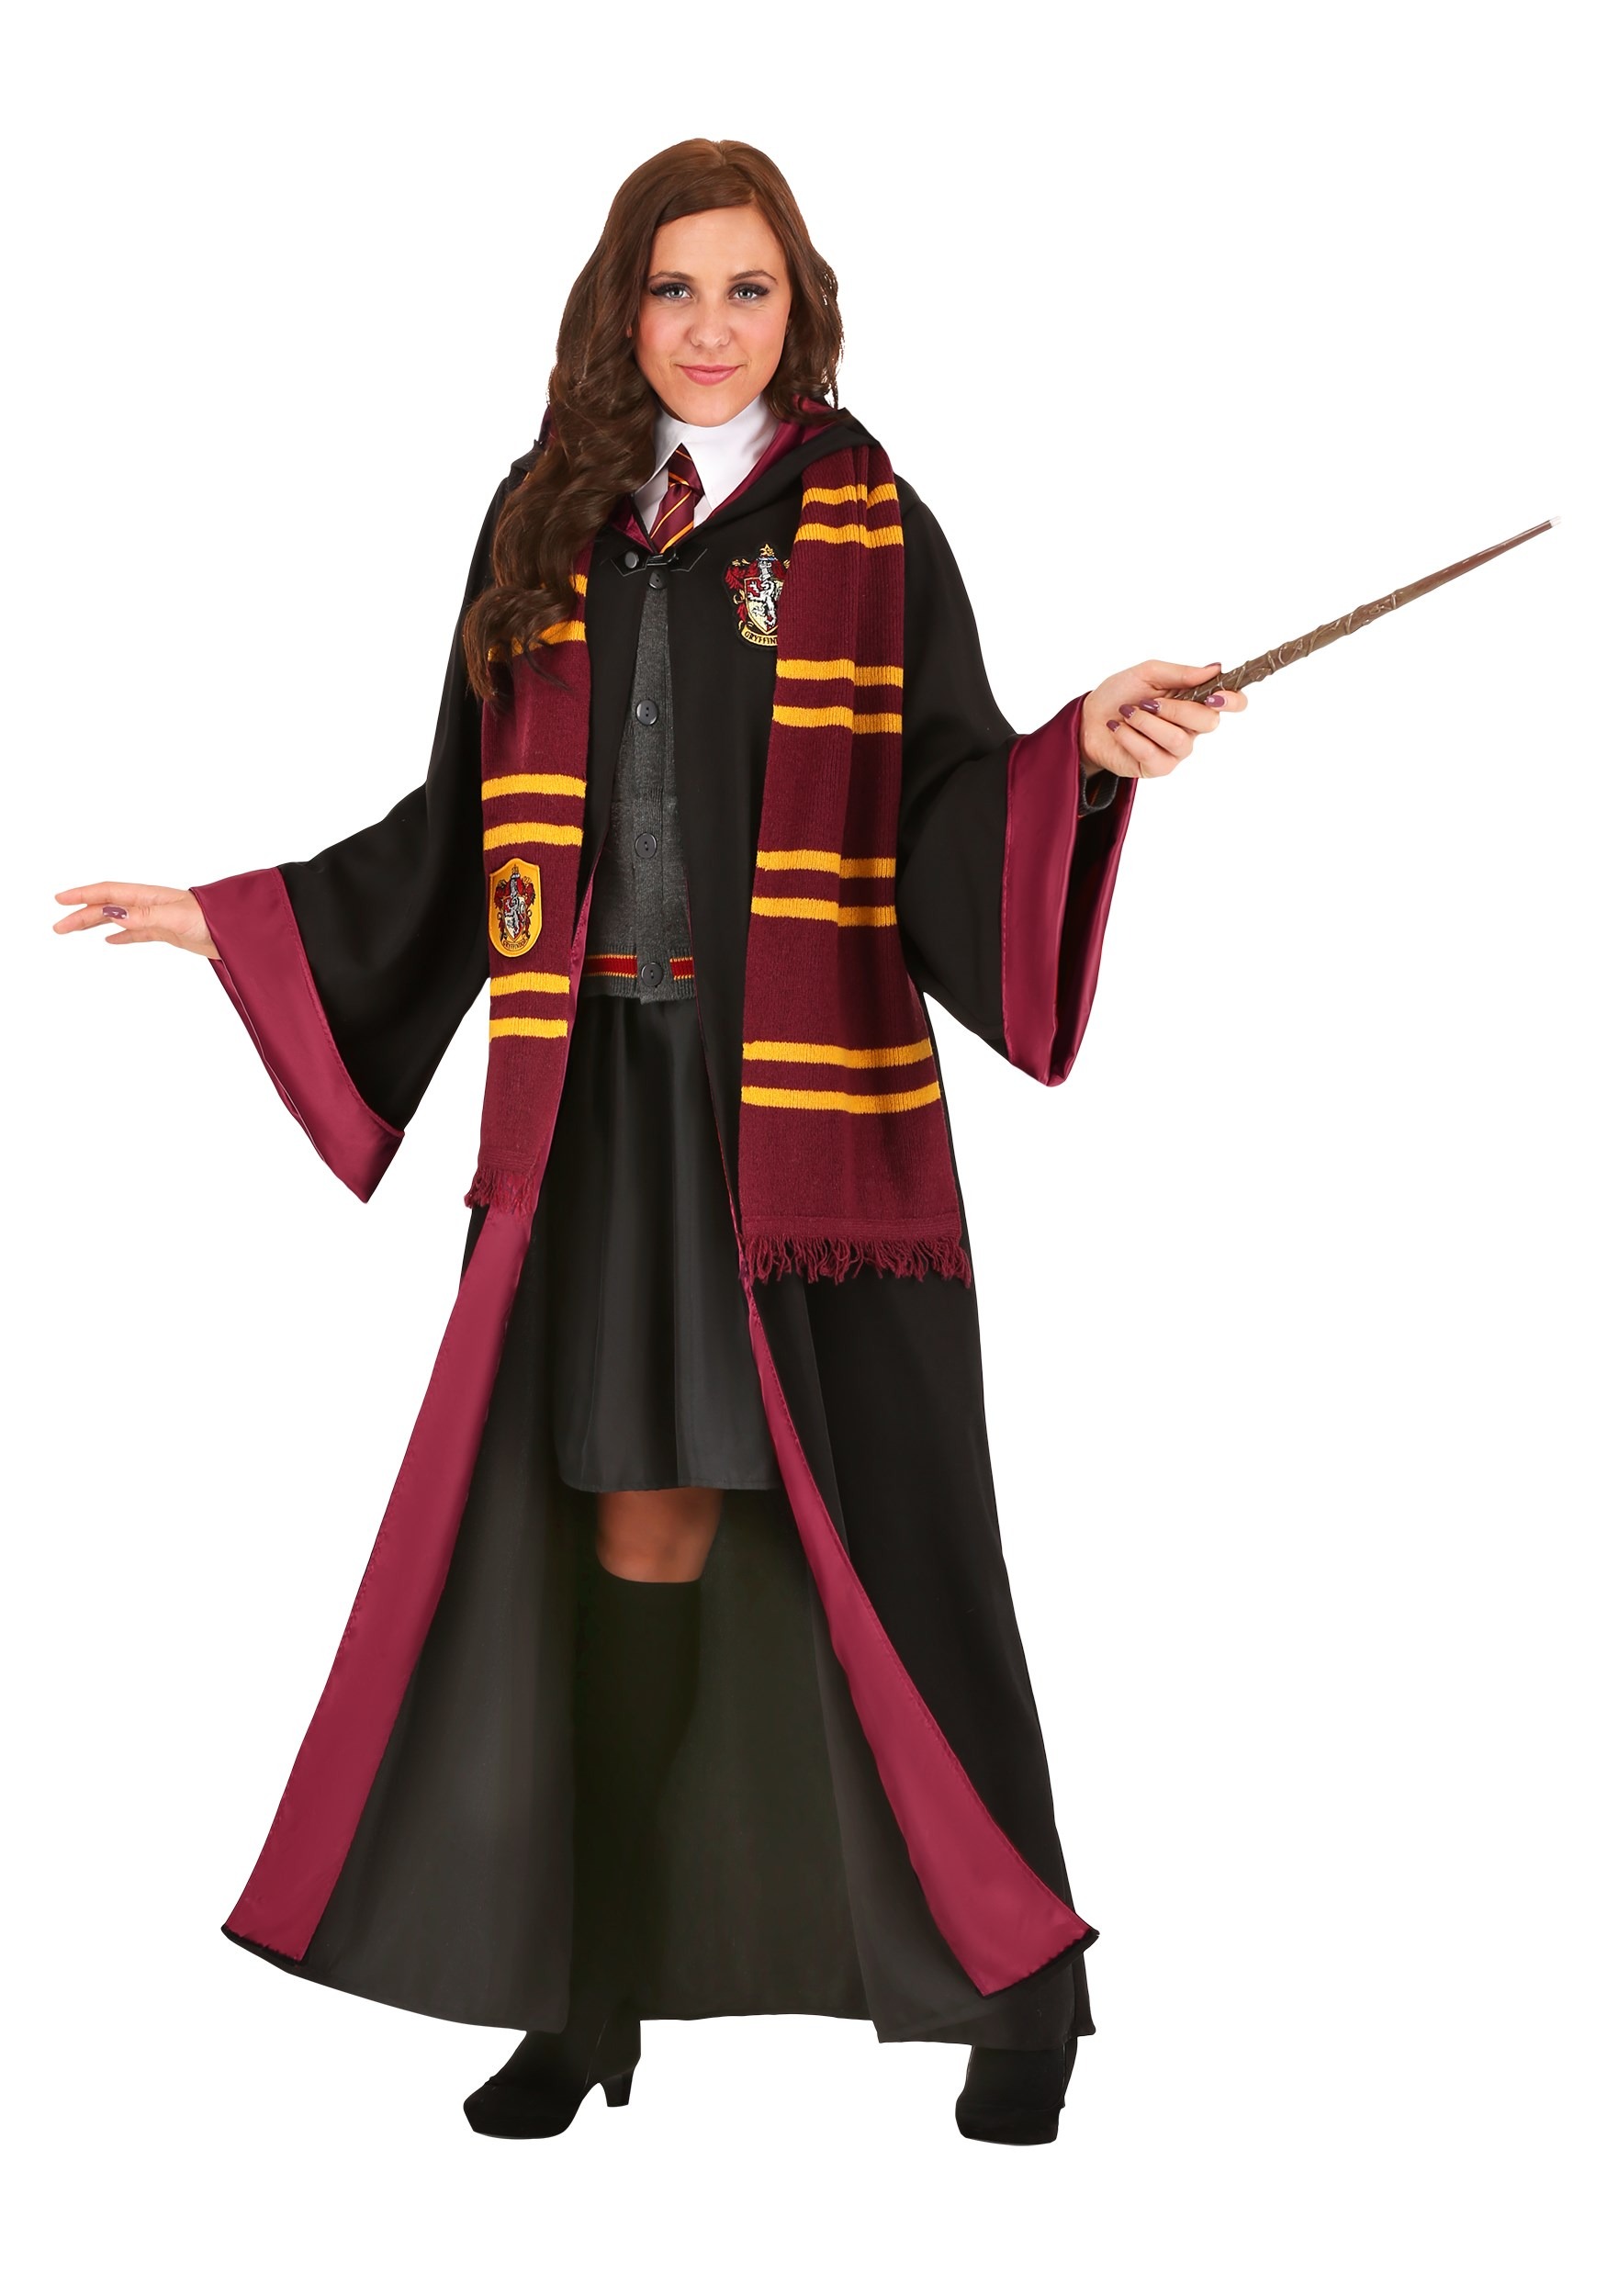 Deluxe Plus Size Harry Potter Hermione Costume